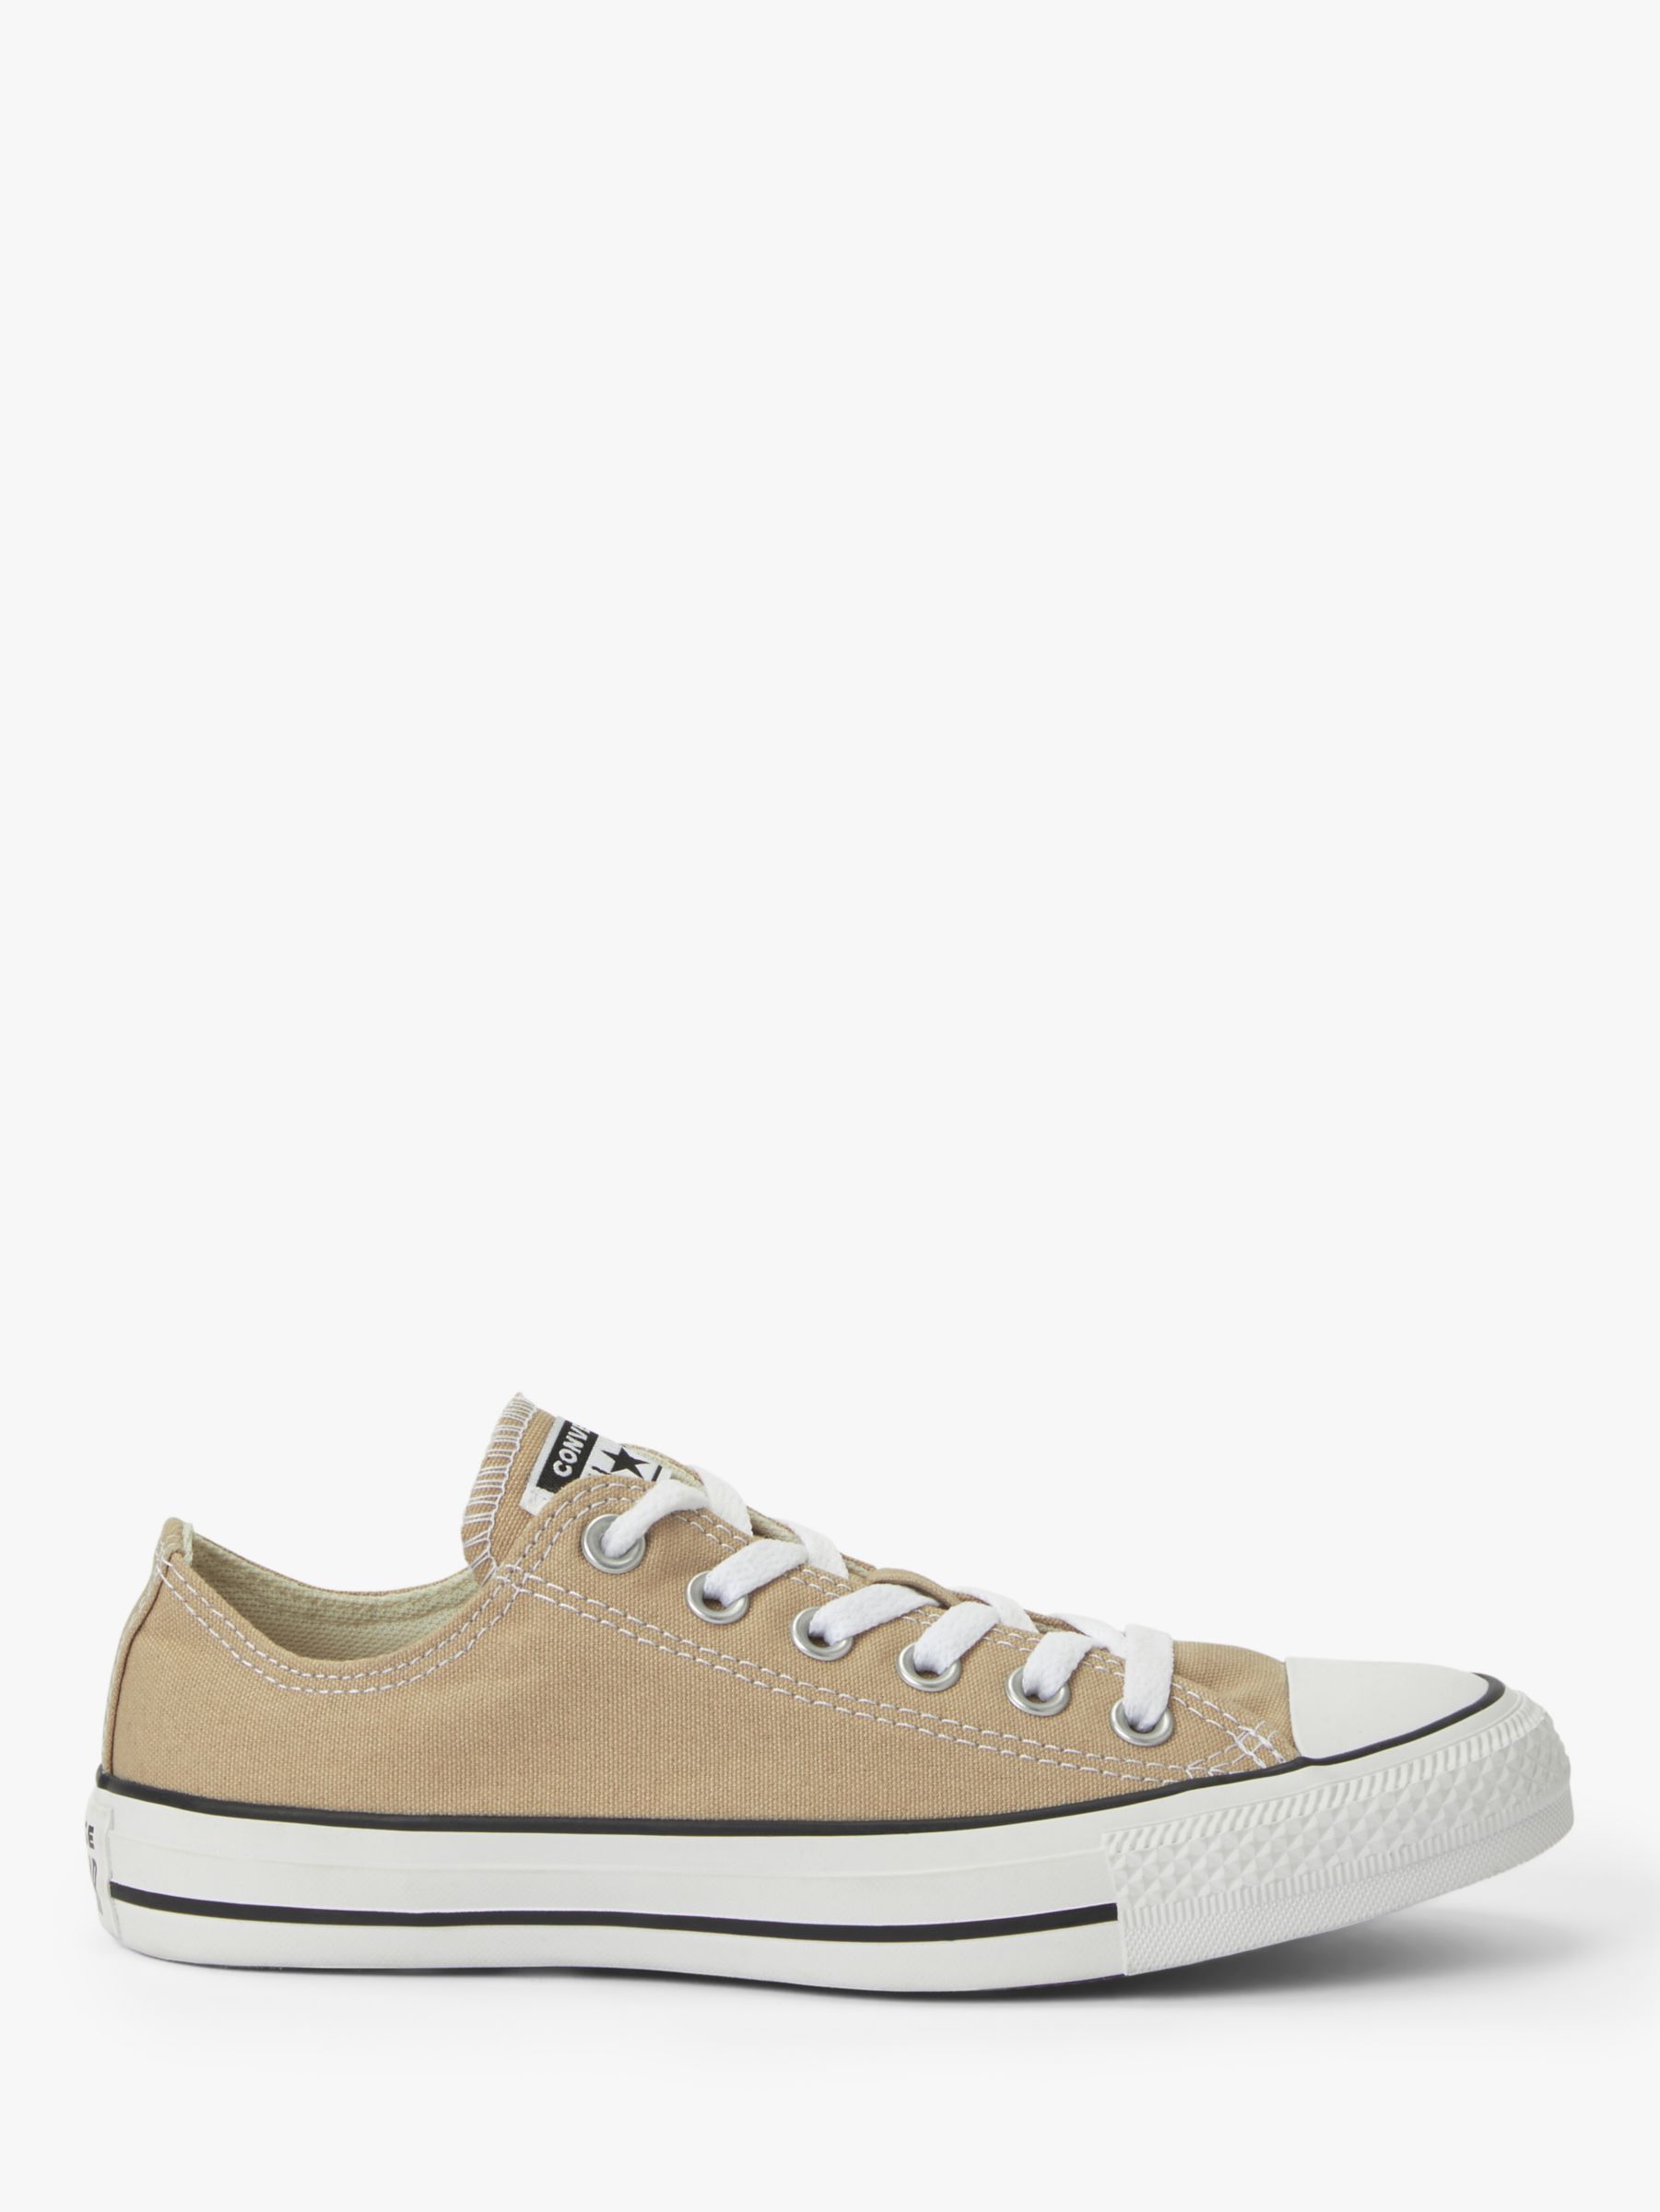 Converse Chuck Taylor All Star Canvas Ox Low-Top Trainers, Desert Khaki at  John Lewis \u0026 Partners